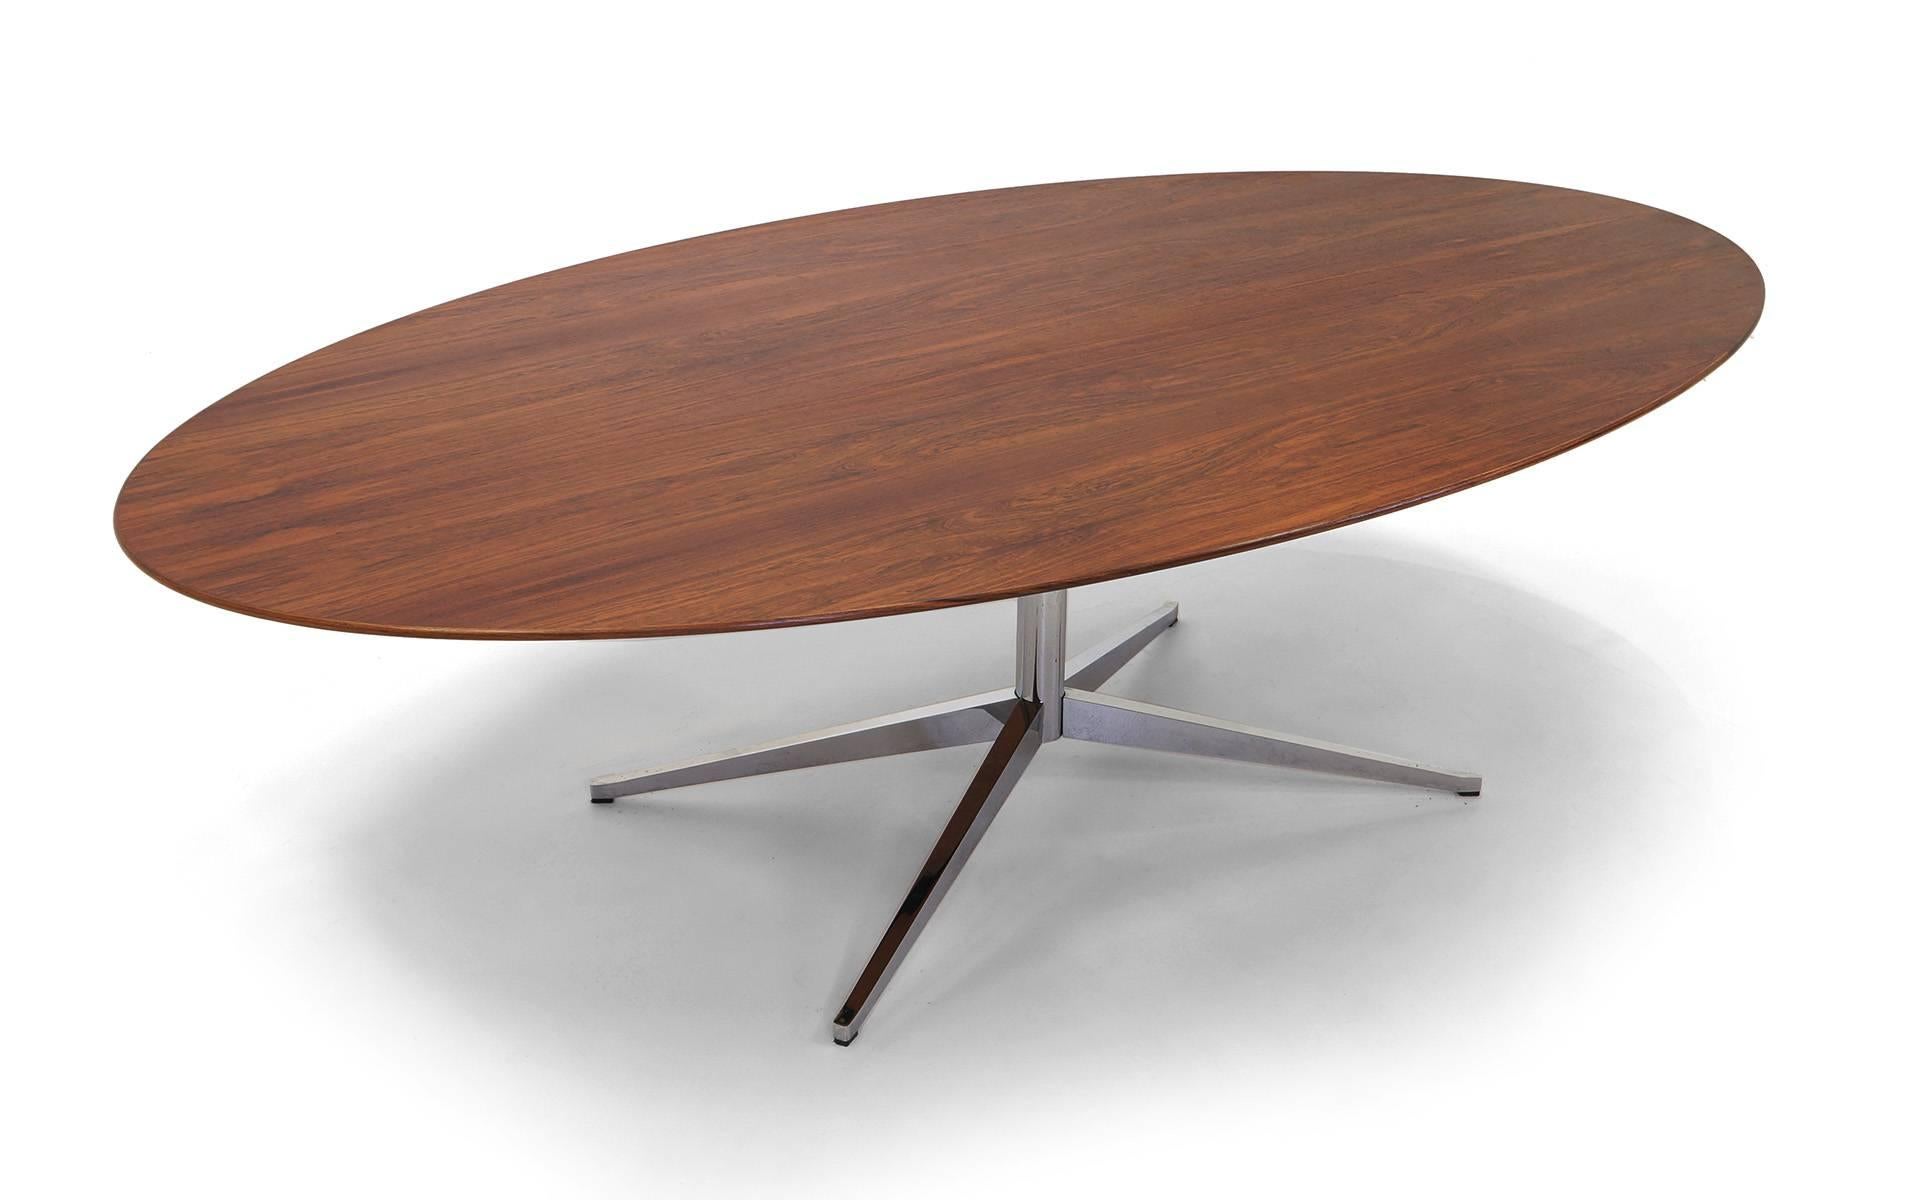 The figuring in this Brazilian rosewood Florence Knoll table is exceptional. Condition is excellent, over 8 feet long with the classic chromed steel base. Design, materials, and quality of build are as good as it gets. Signed with paper Knoll